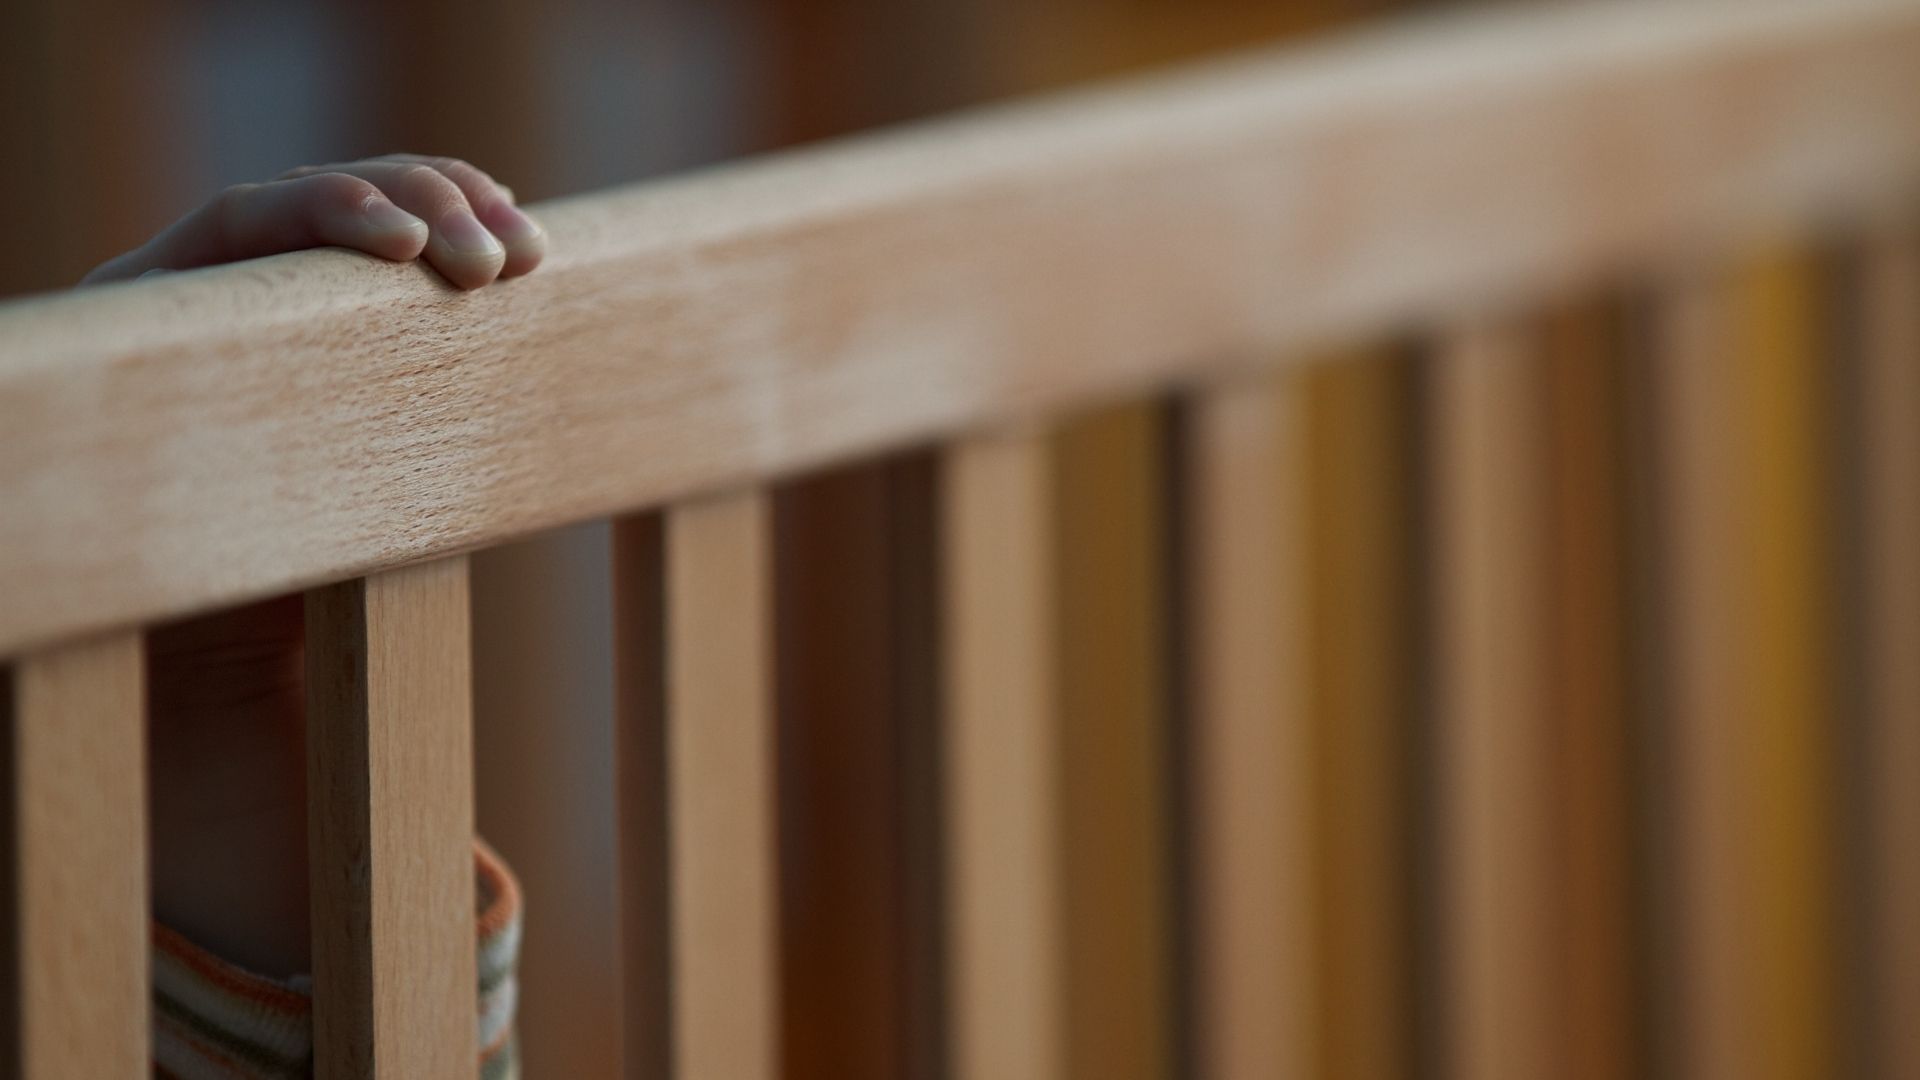 A child reaching out of a cot in an orphanage